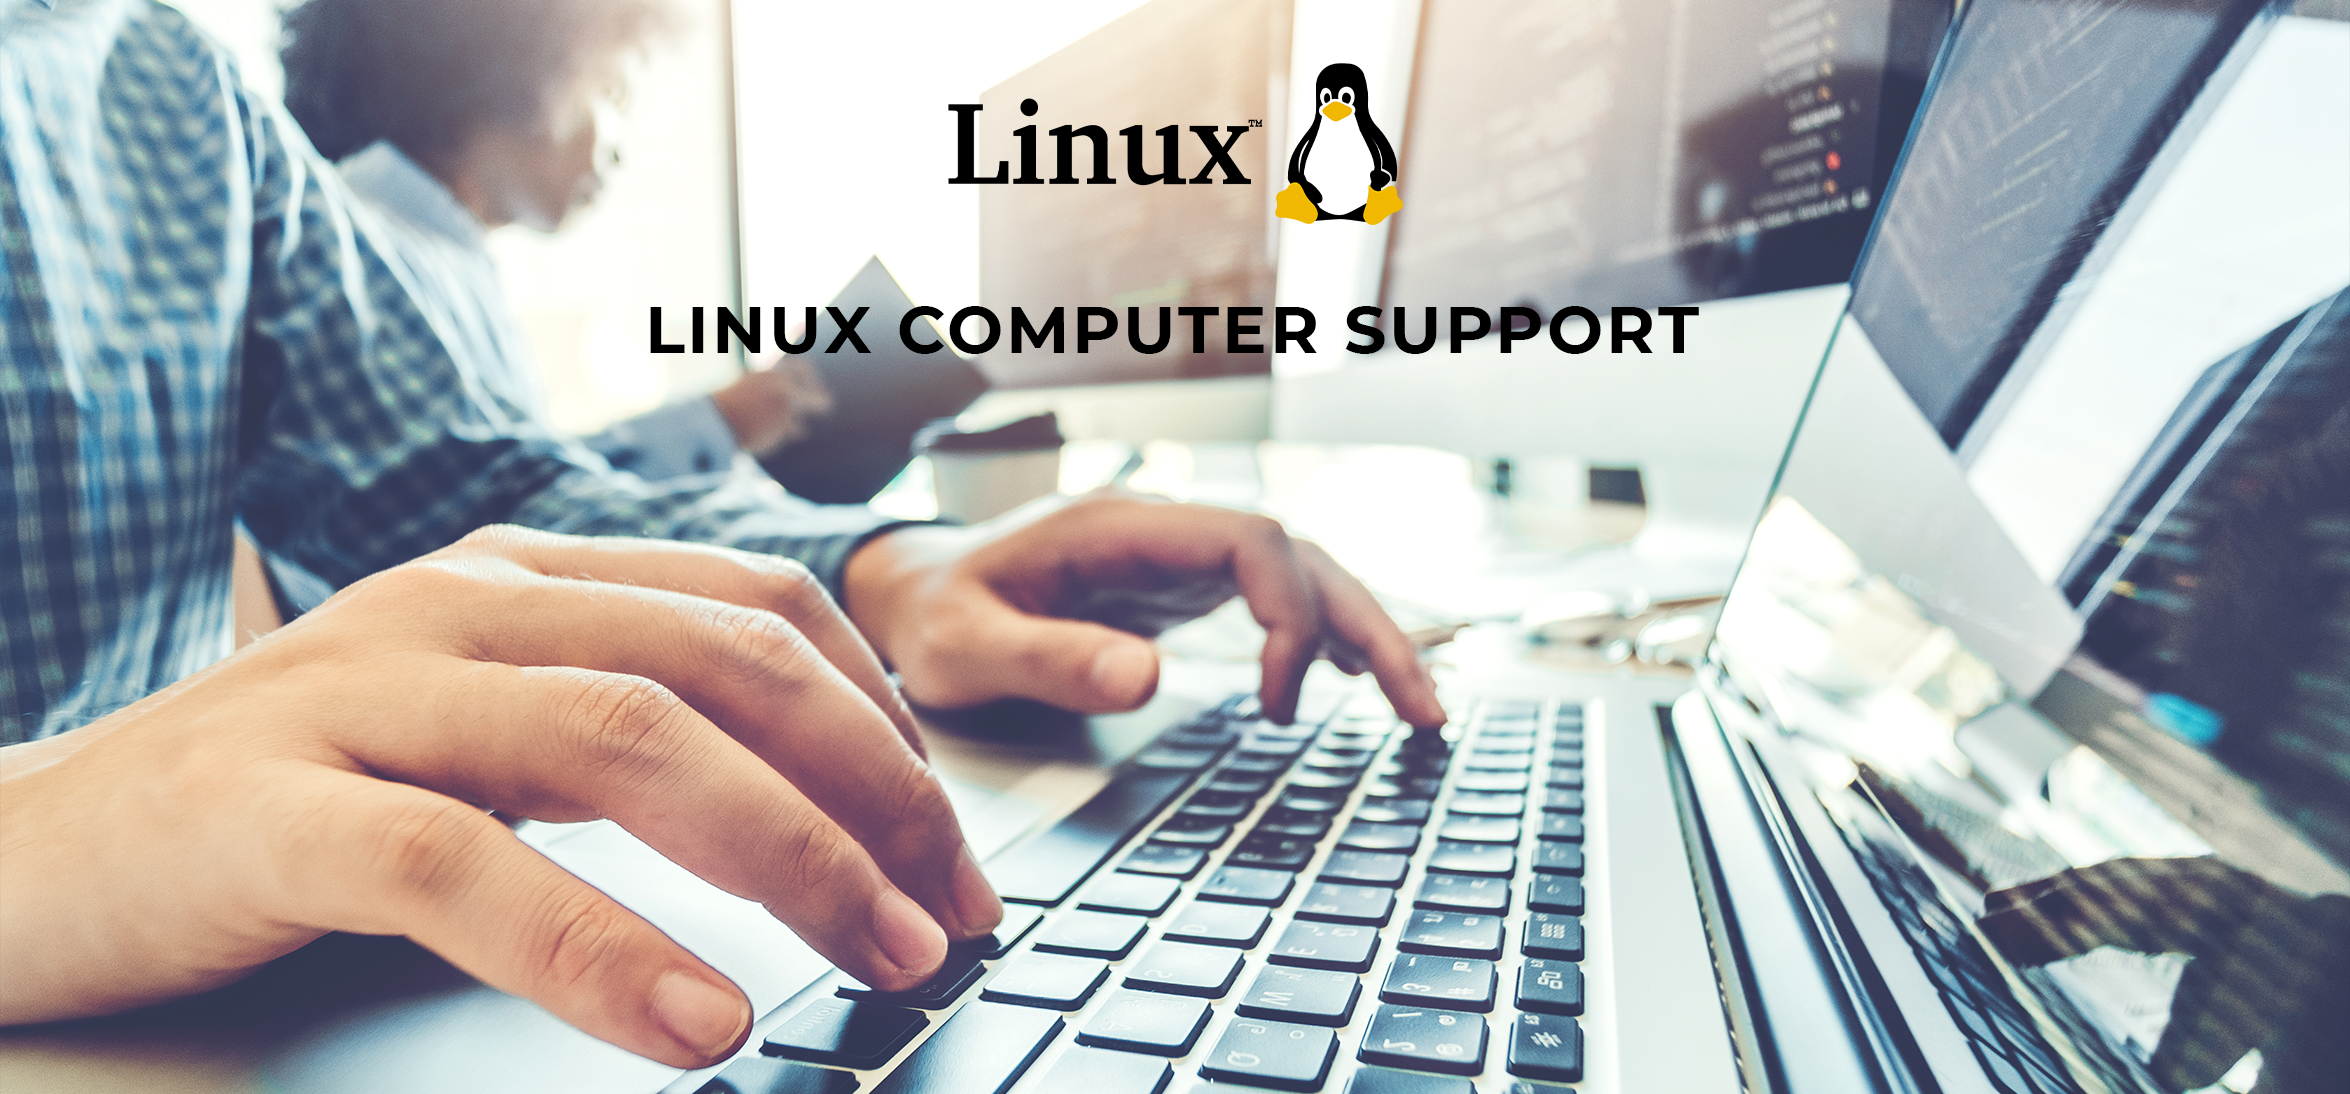 Support for Linux Servers in Julian CA, 92036